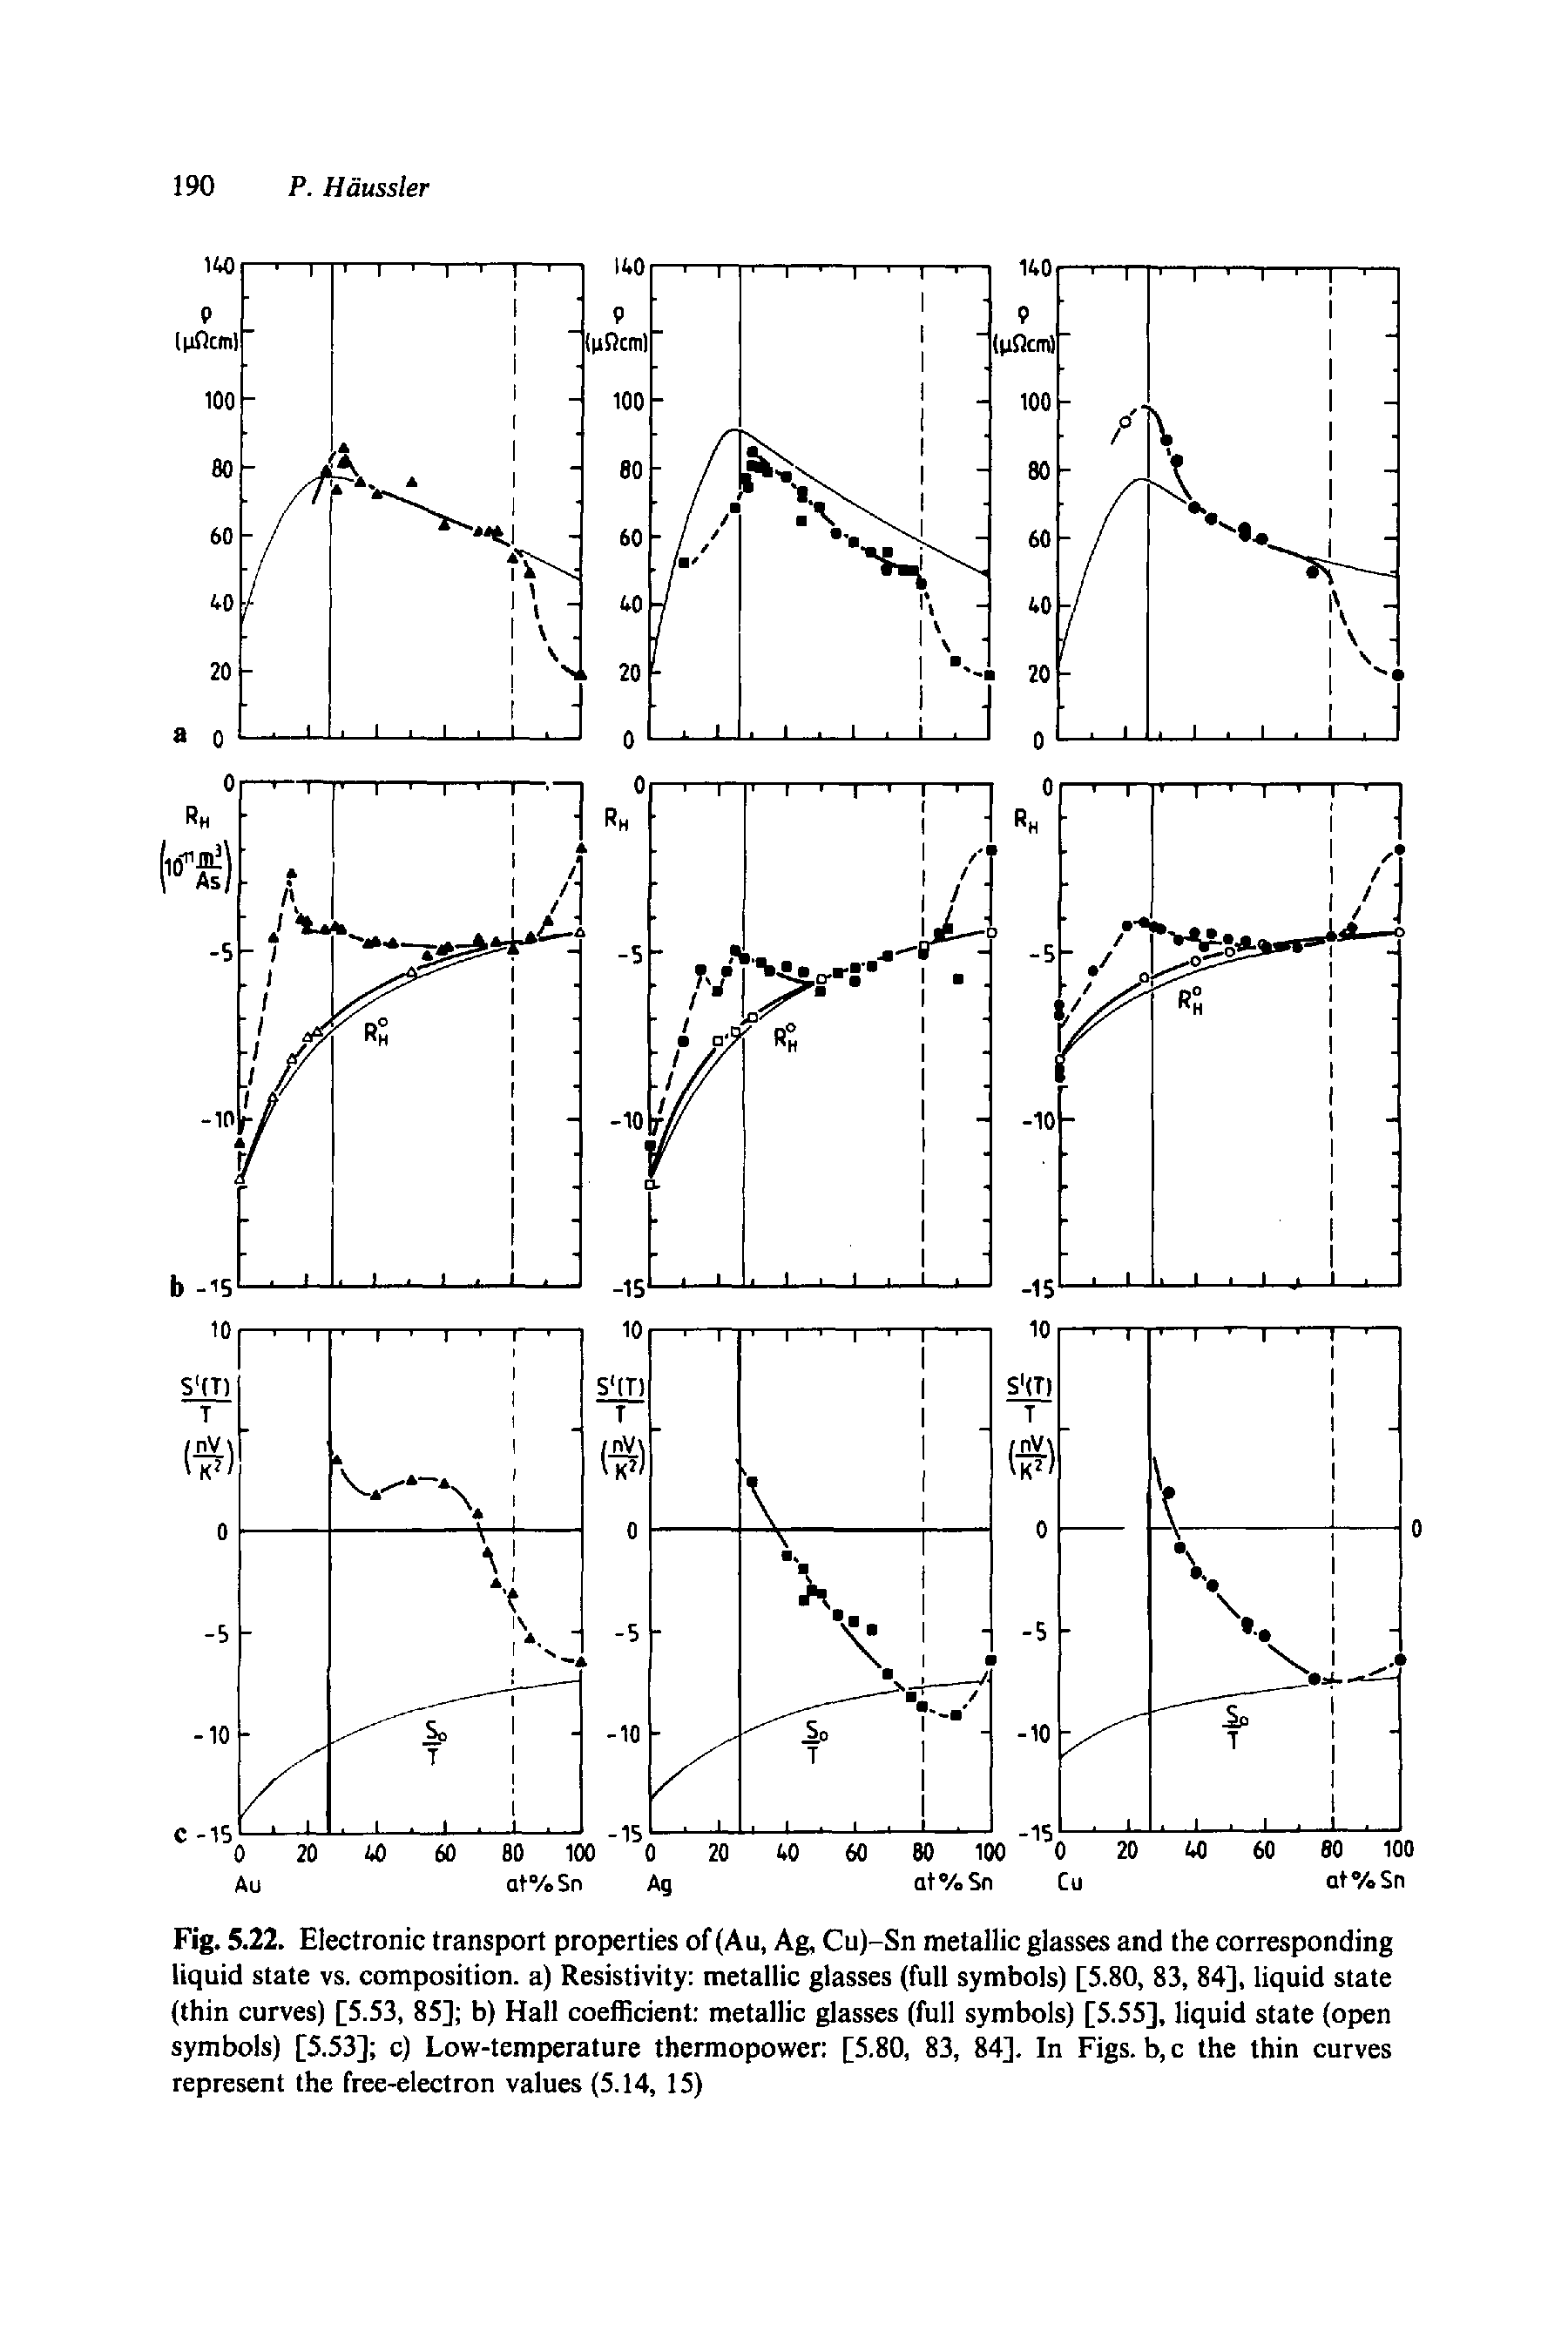 Fig. 5.22. Electronic transport properties of (Au, Ag, Cu)-Sn metallic glasses and the corresponding liquid state vs. composition, a) Resistivity metallic glasses (full symbols) [5.80, 83, 84], liquid state (thin curves) [5.53, 85] b) Hall coefficient metallic glasses (full symbols) [5.55], liquid state (open symbols) [5.53] c) Low-temperature thermopower [5.80, 83, 84]. In Figs, b, c the thin curves represent the free-electron values (5.14, 15)...